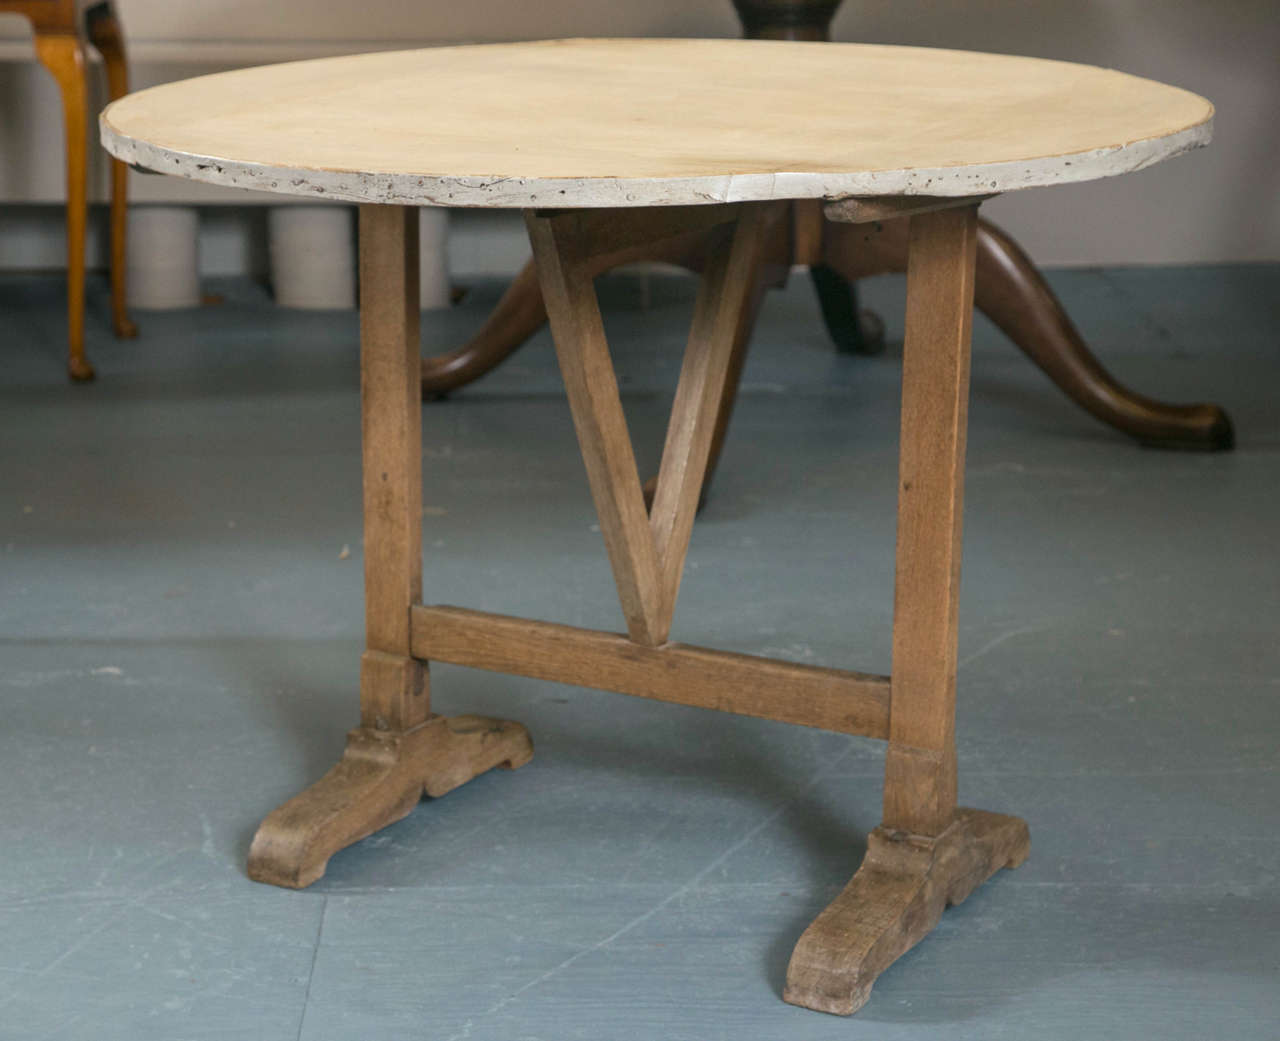 A pale grey painted top on a rustic fruitwood base of typical form give this tilt top table a genuine country look. The paint has some age, but is in good condition. However, it would not be a travesty to repaint the top, since this particular table